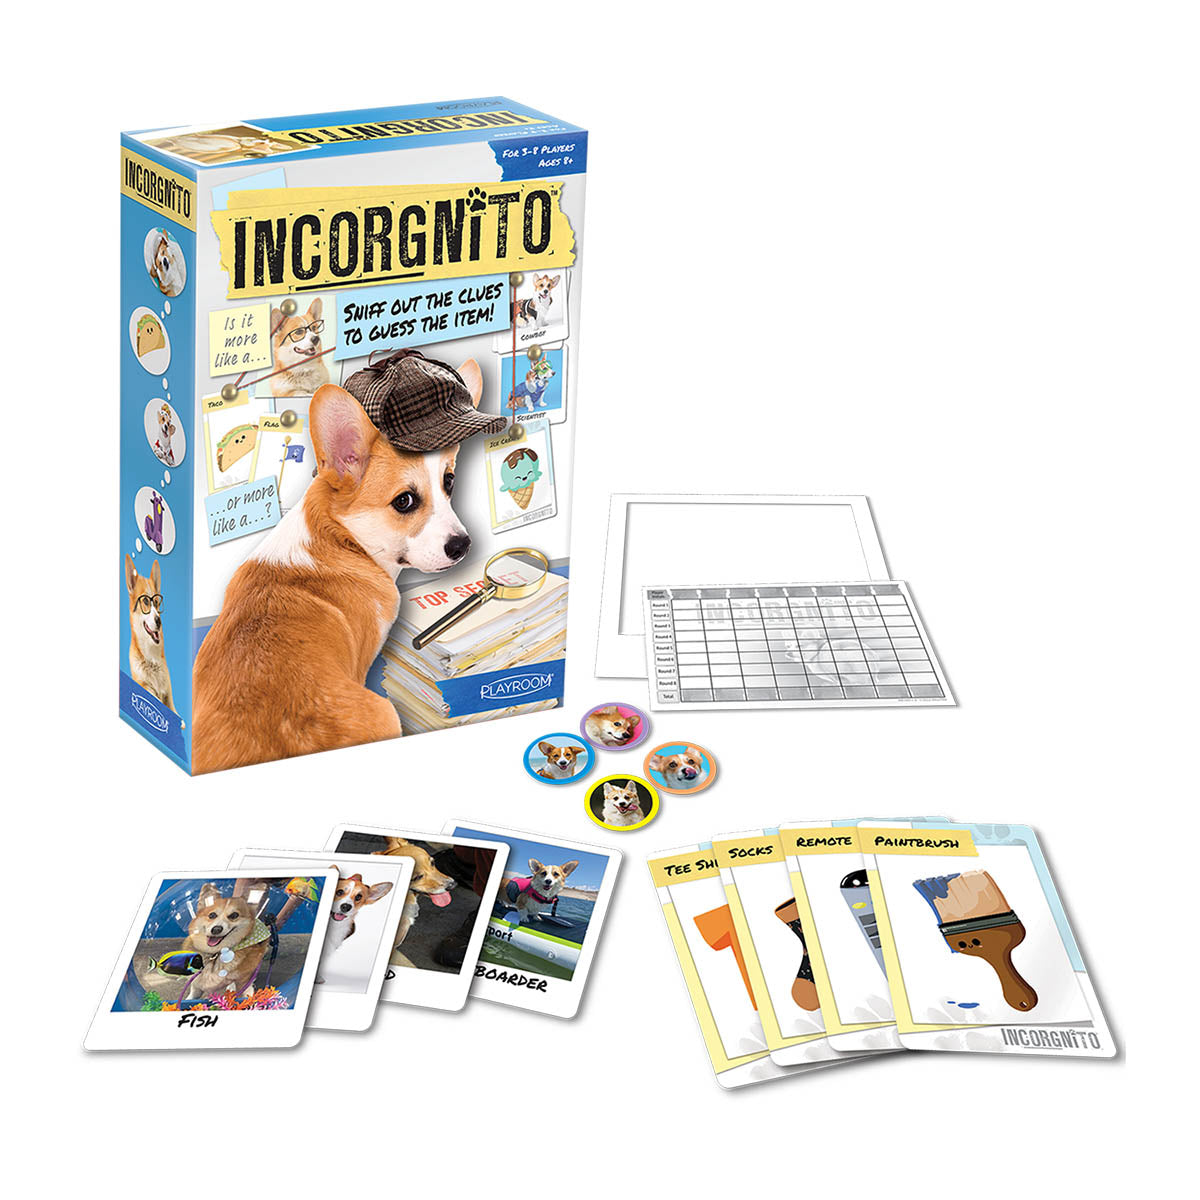 Incorgnito | A Family-Party Game for Ages 8 and Up, 3–8 Players | Ultra PRO Entertainment